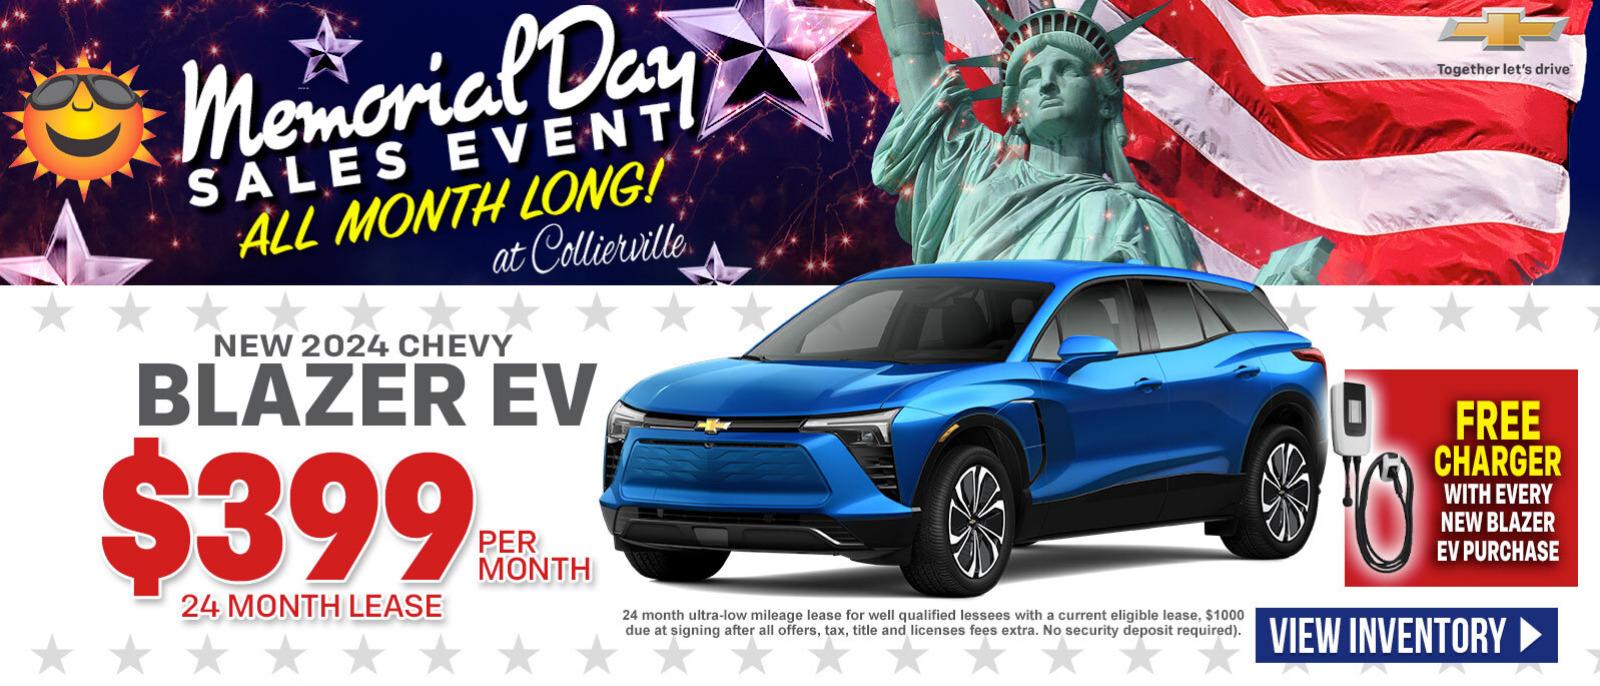 Free Charger with Every New Blazer EV Purchase - Lease for 399 Per Month